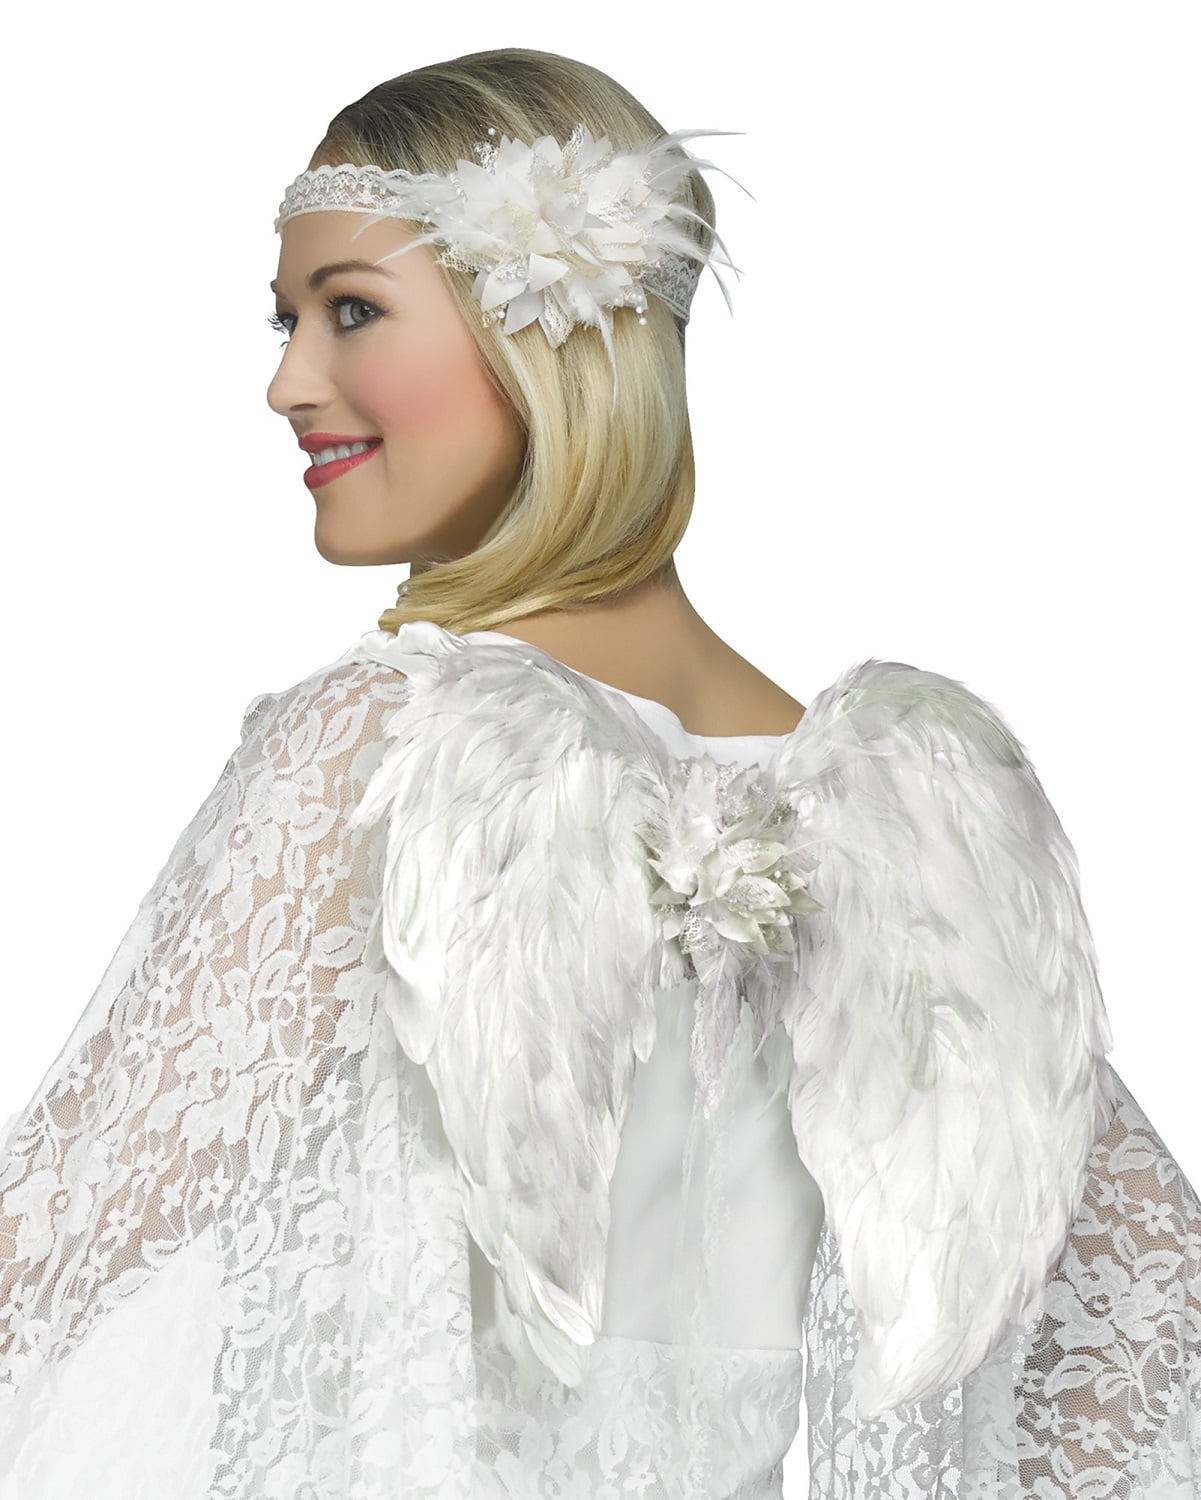 Lace Instant Angel Costume Kit Flower Headband White Wings Accessory Set